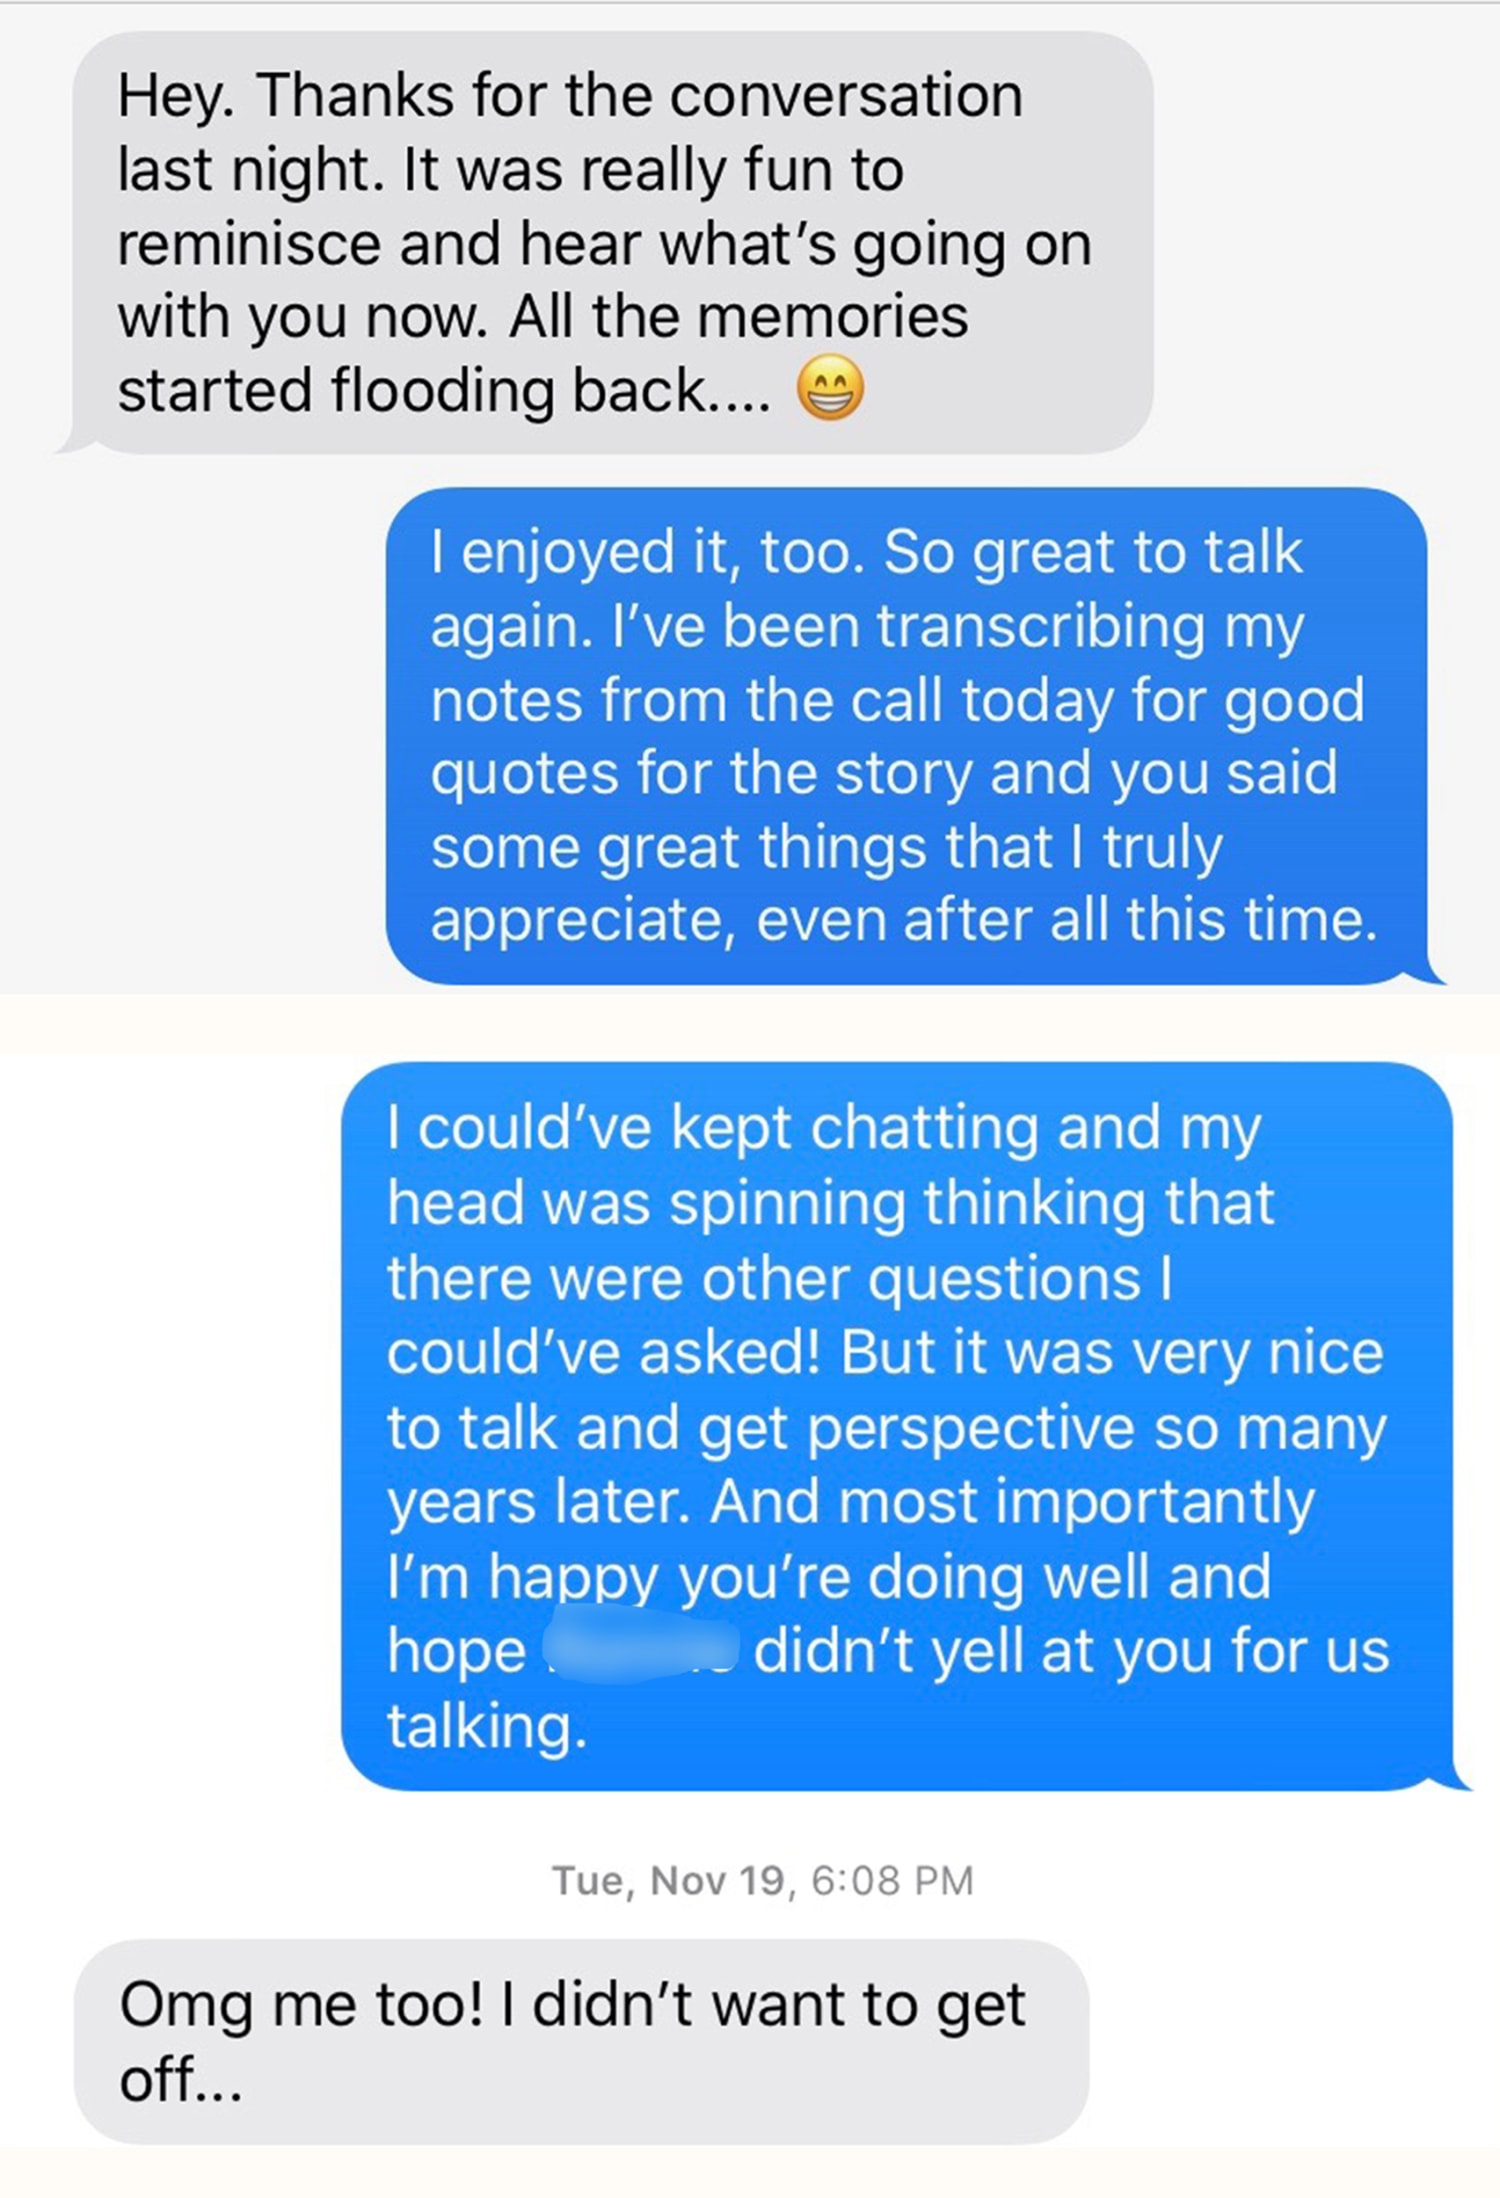 What to say to an ex that you want back